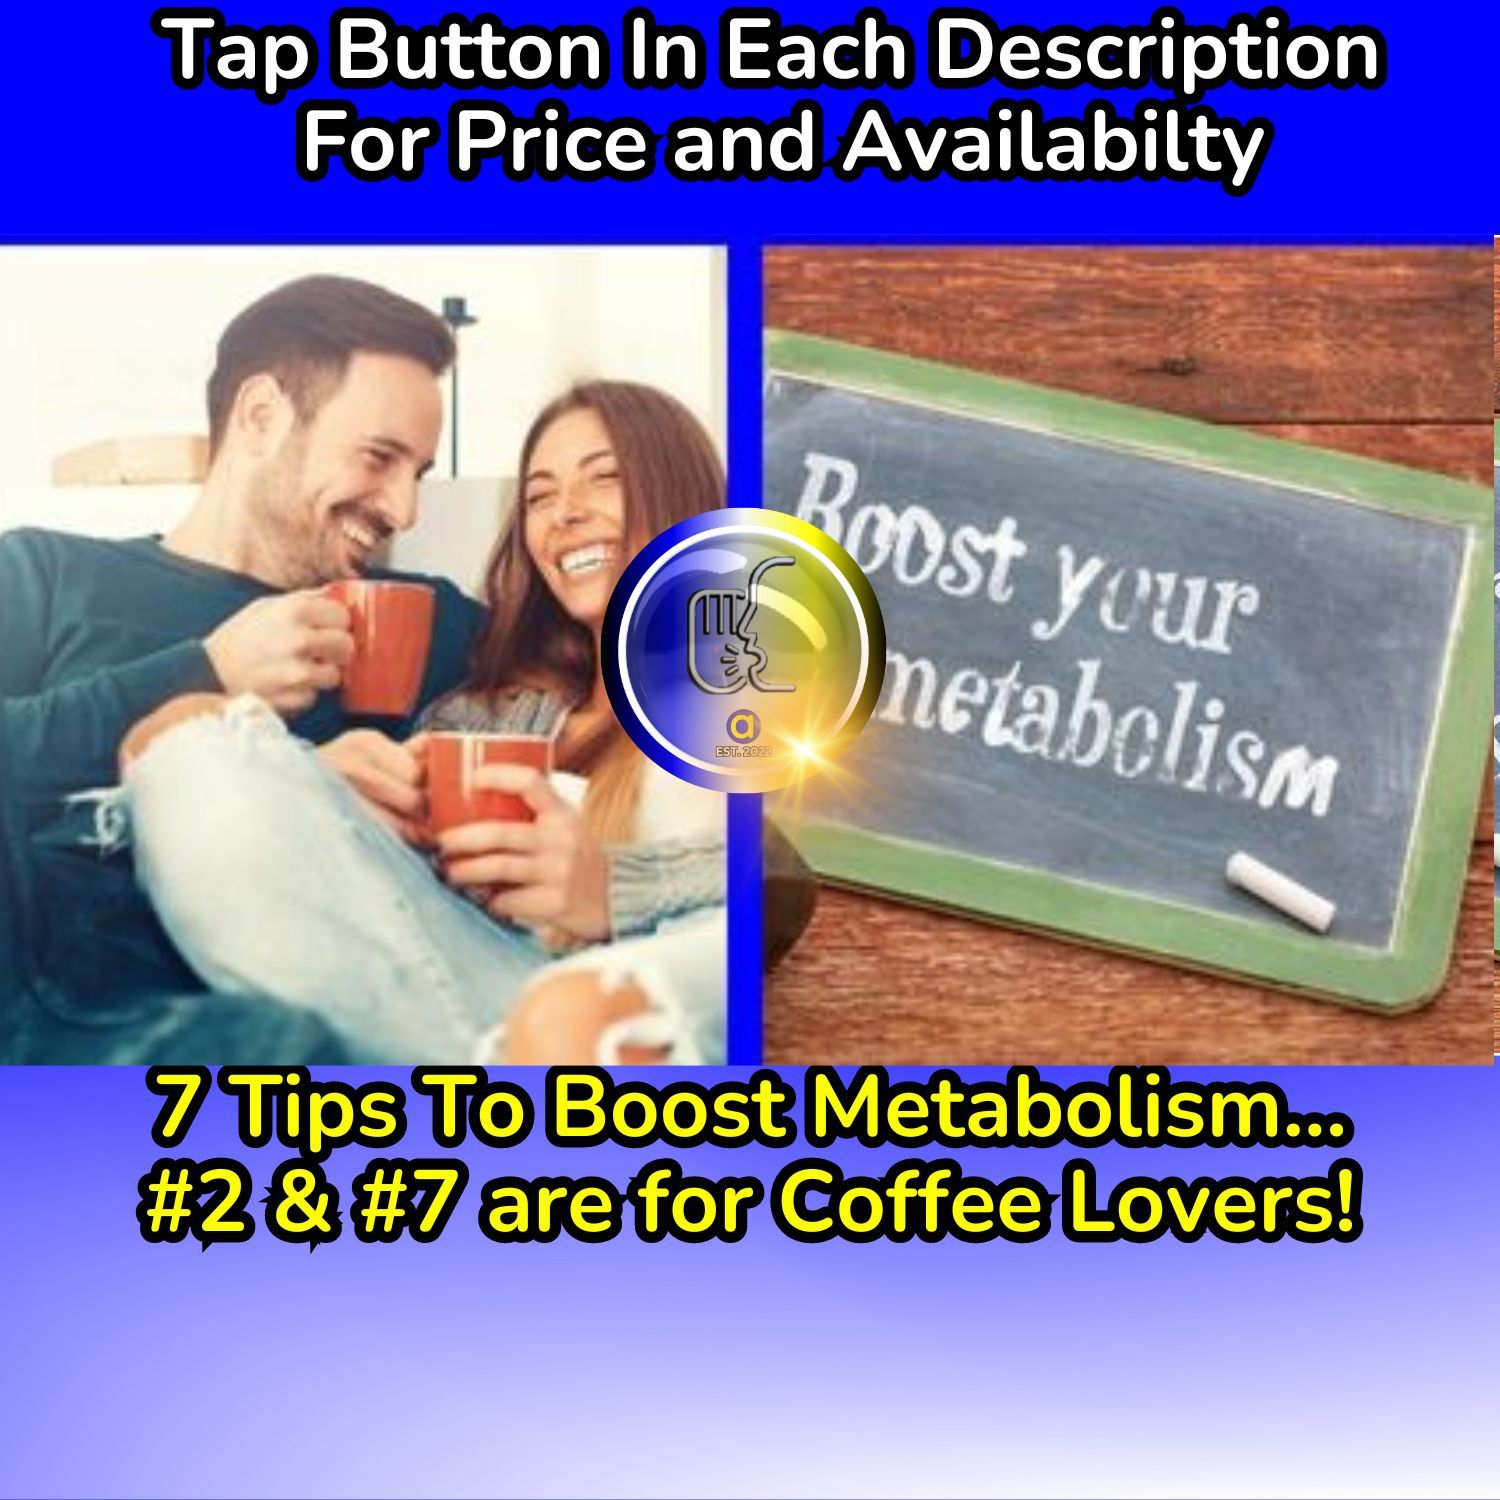 How can I trick my metabolism into burning fat